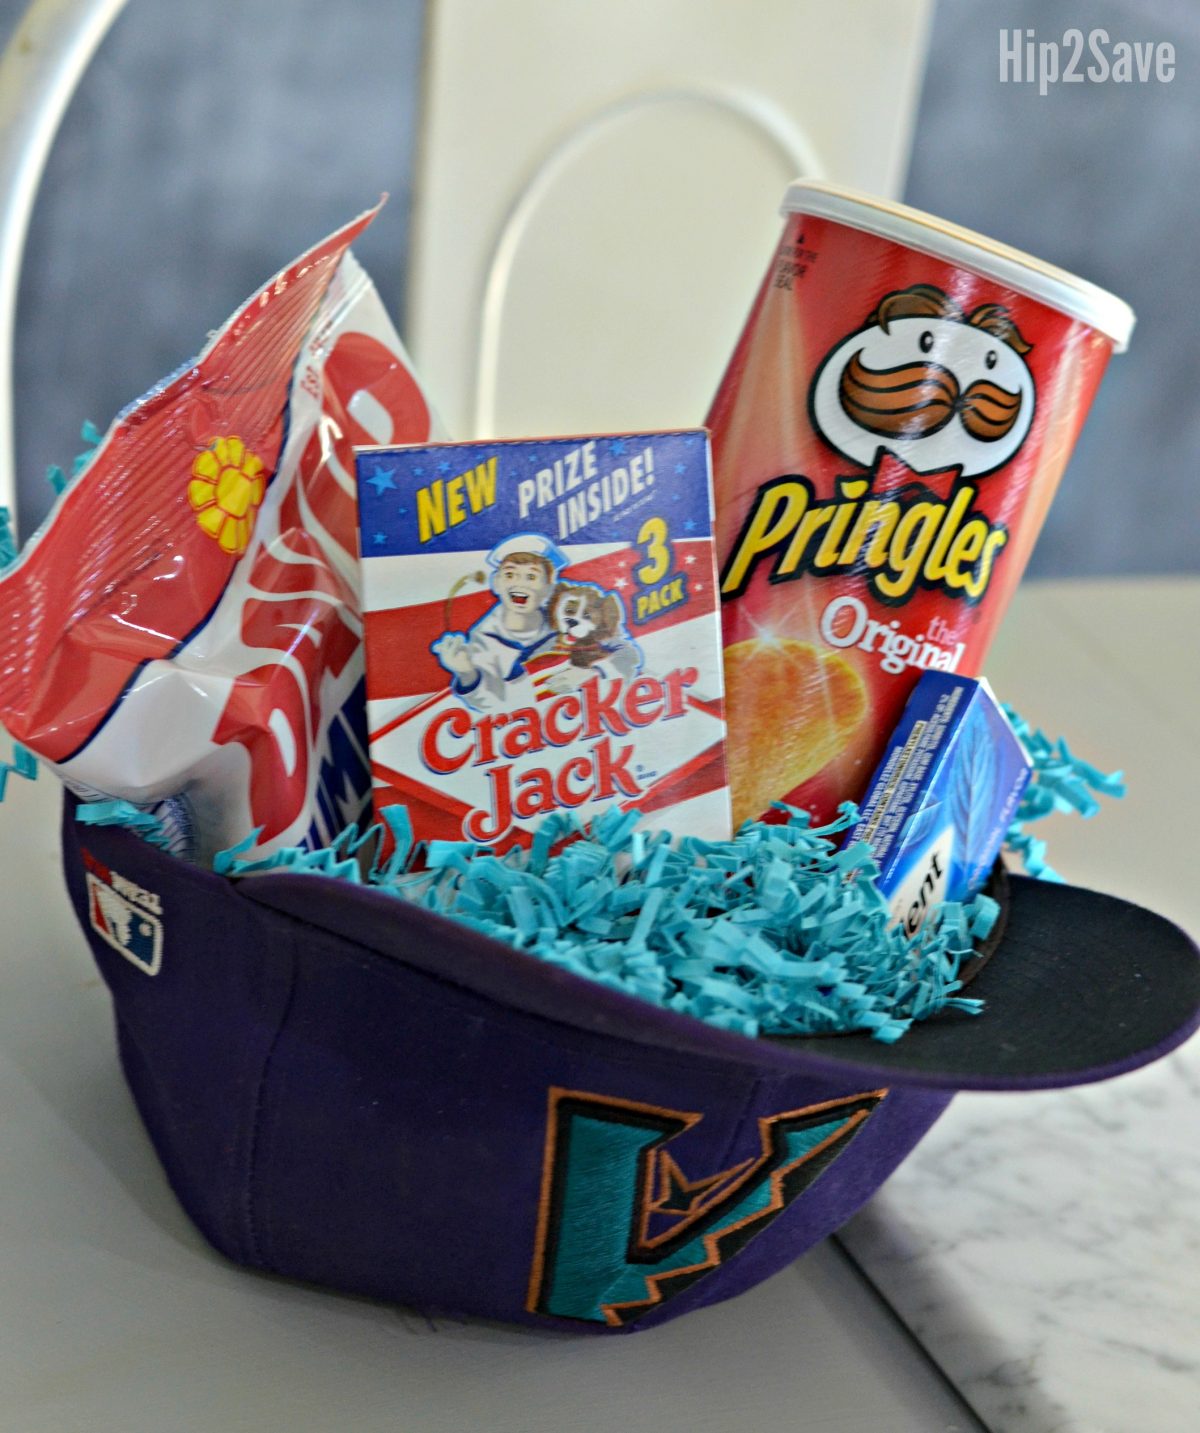 baseball hat used as an Easter basket